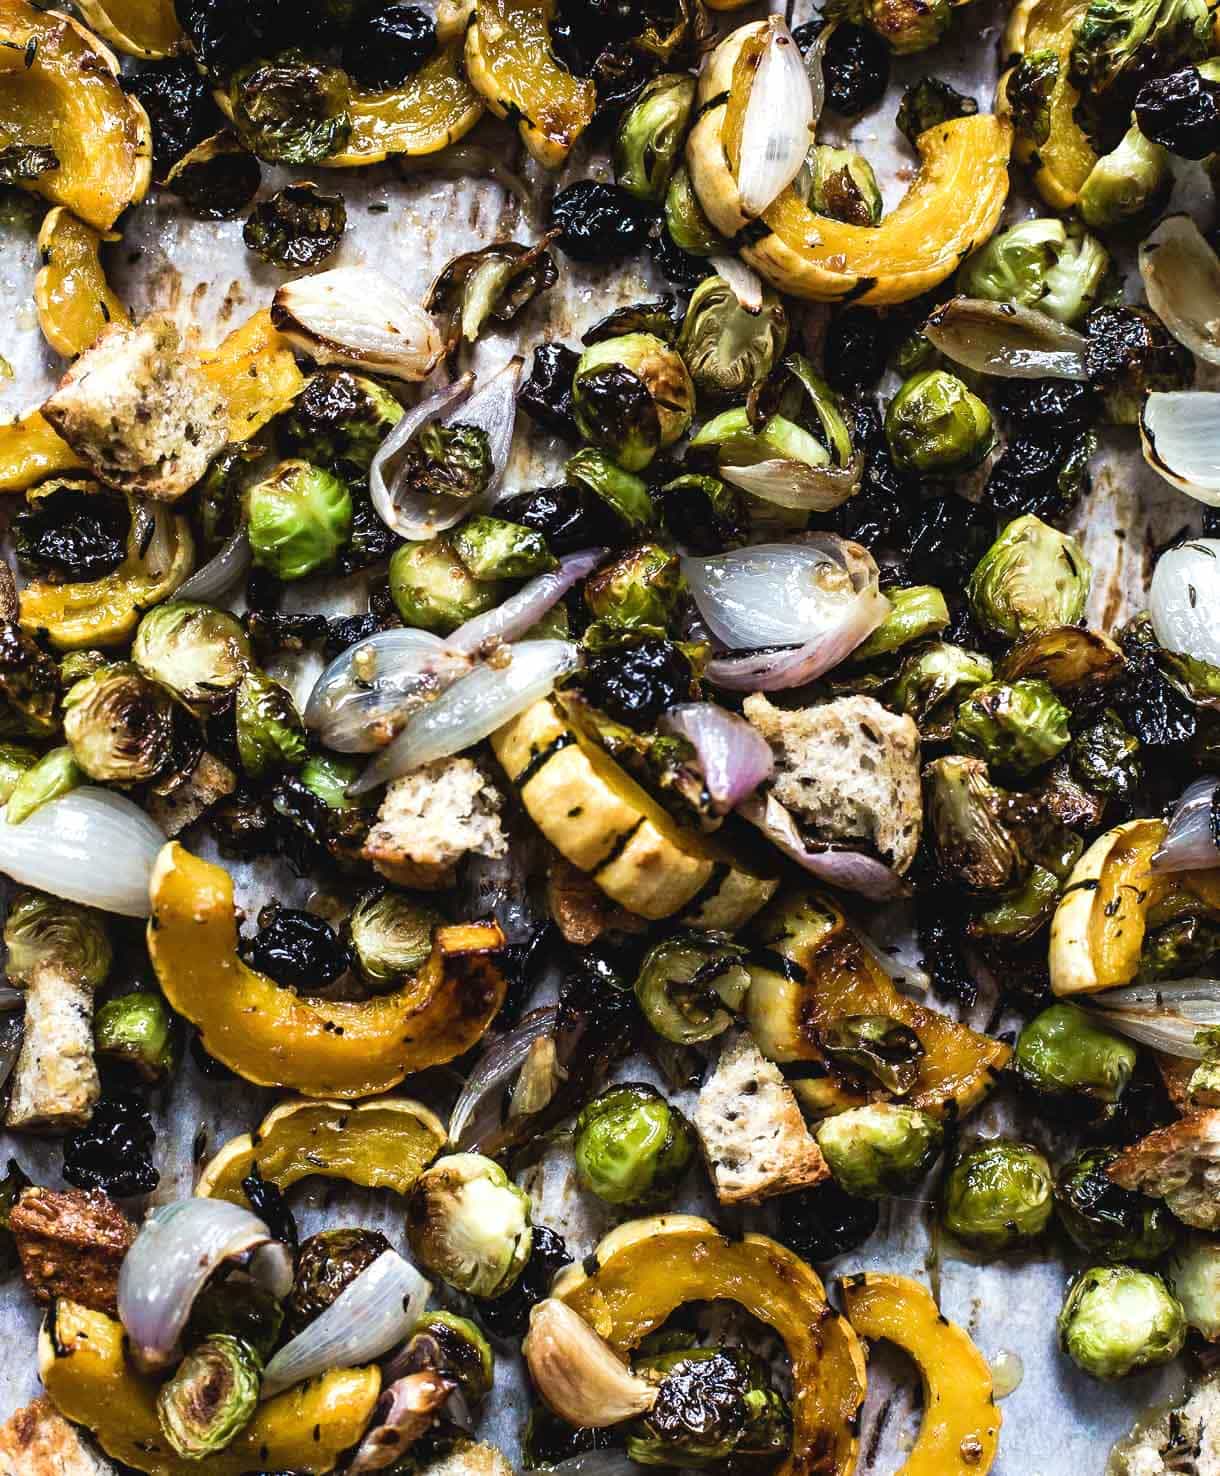 Vegan Stuffing with squash, brussels sprouts, and shallots